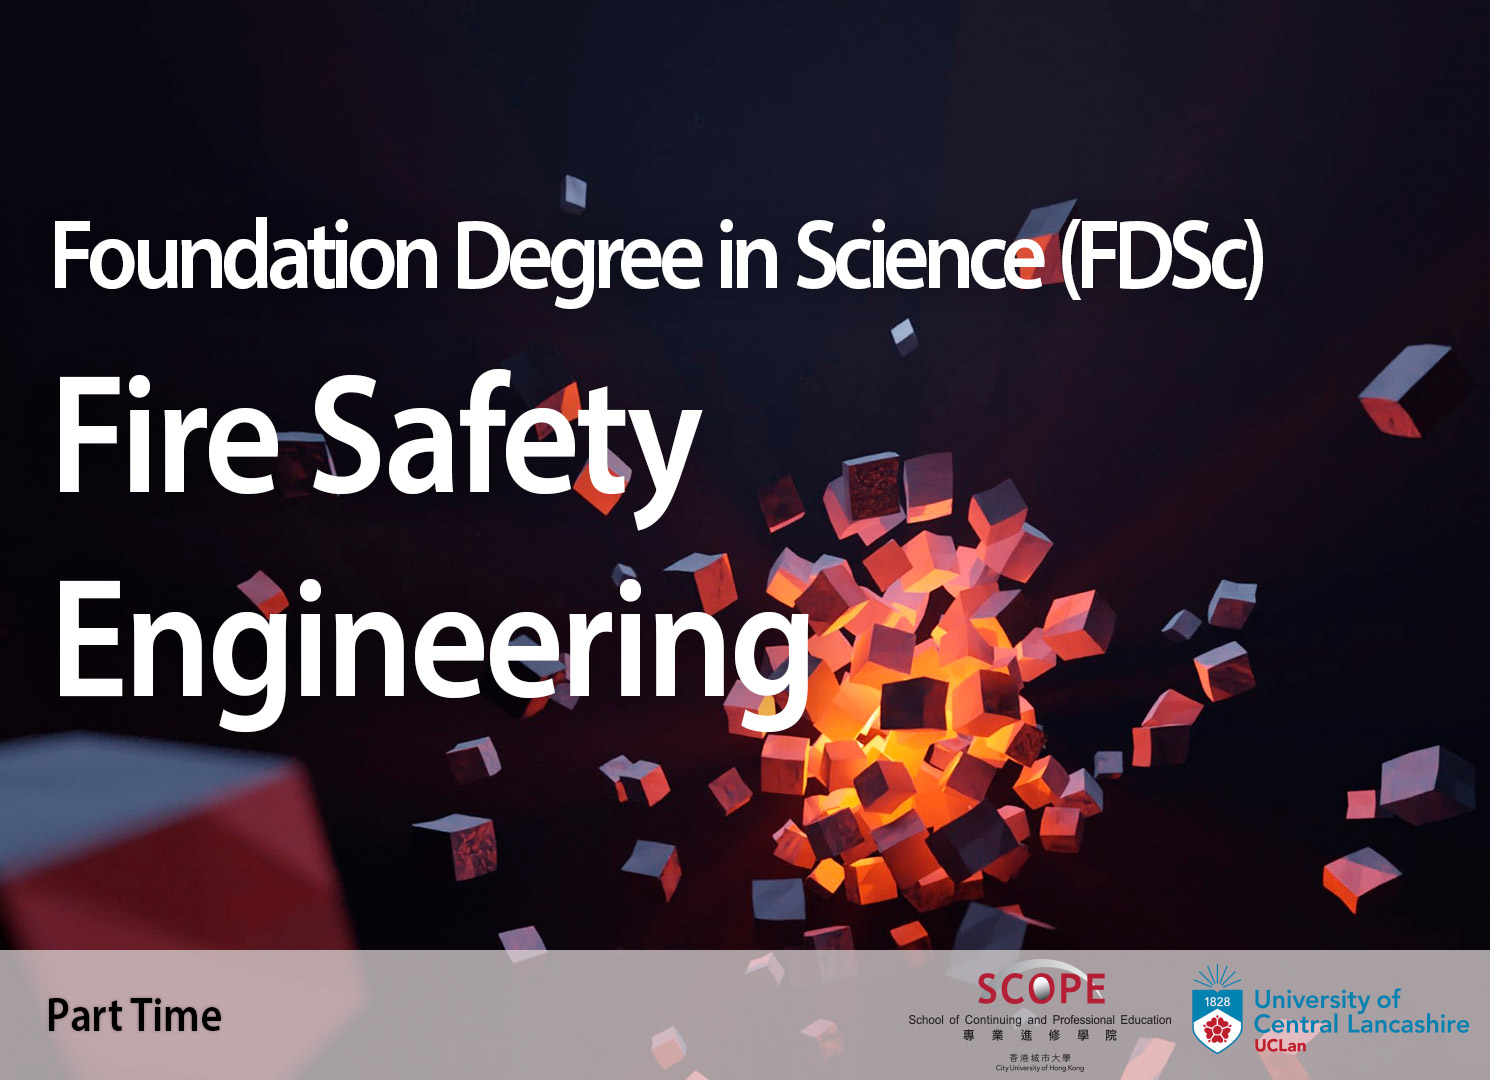 Foundation Degree in Science (FDSc) Fire Safety Engineering